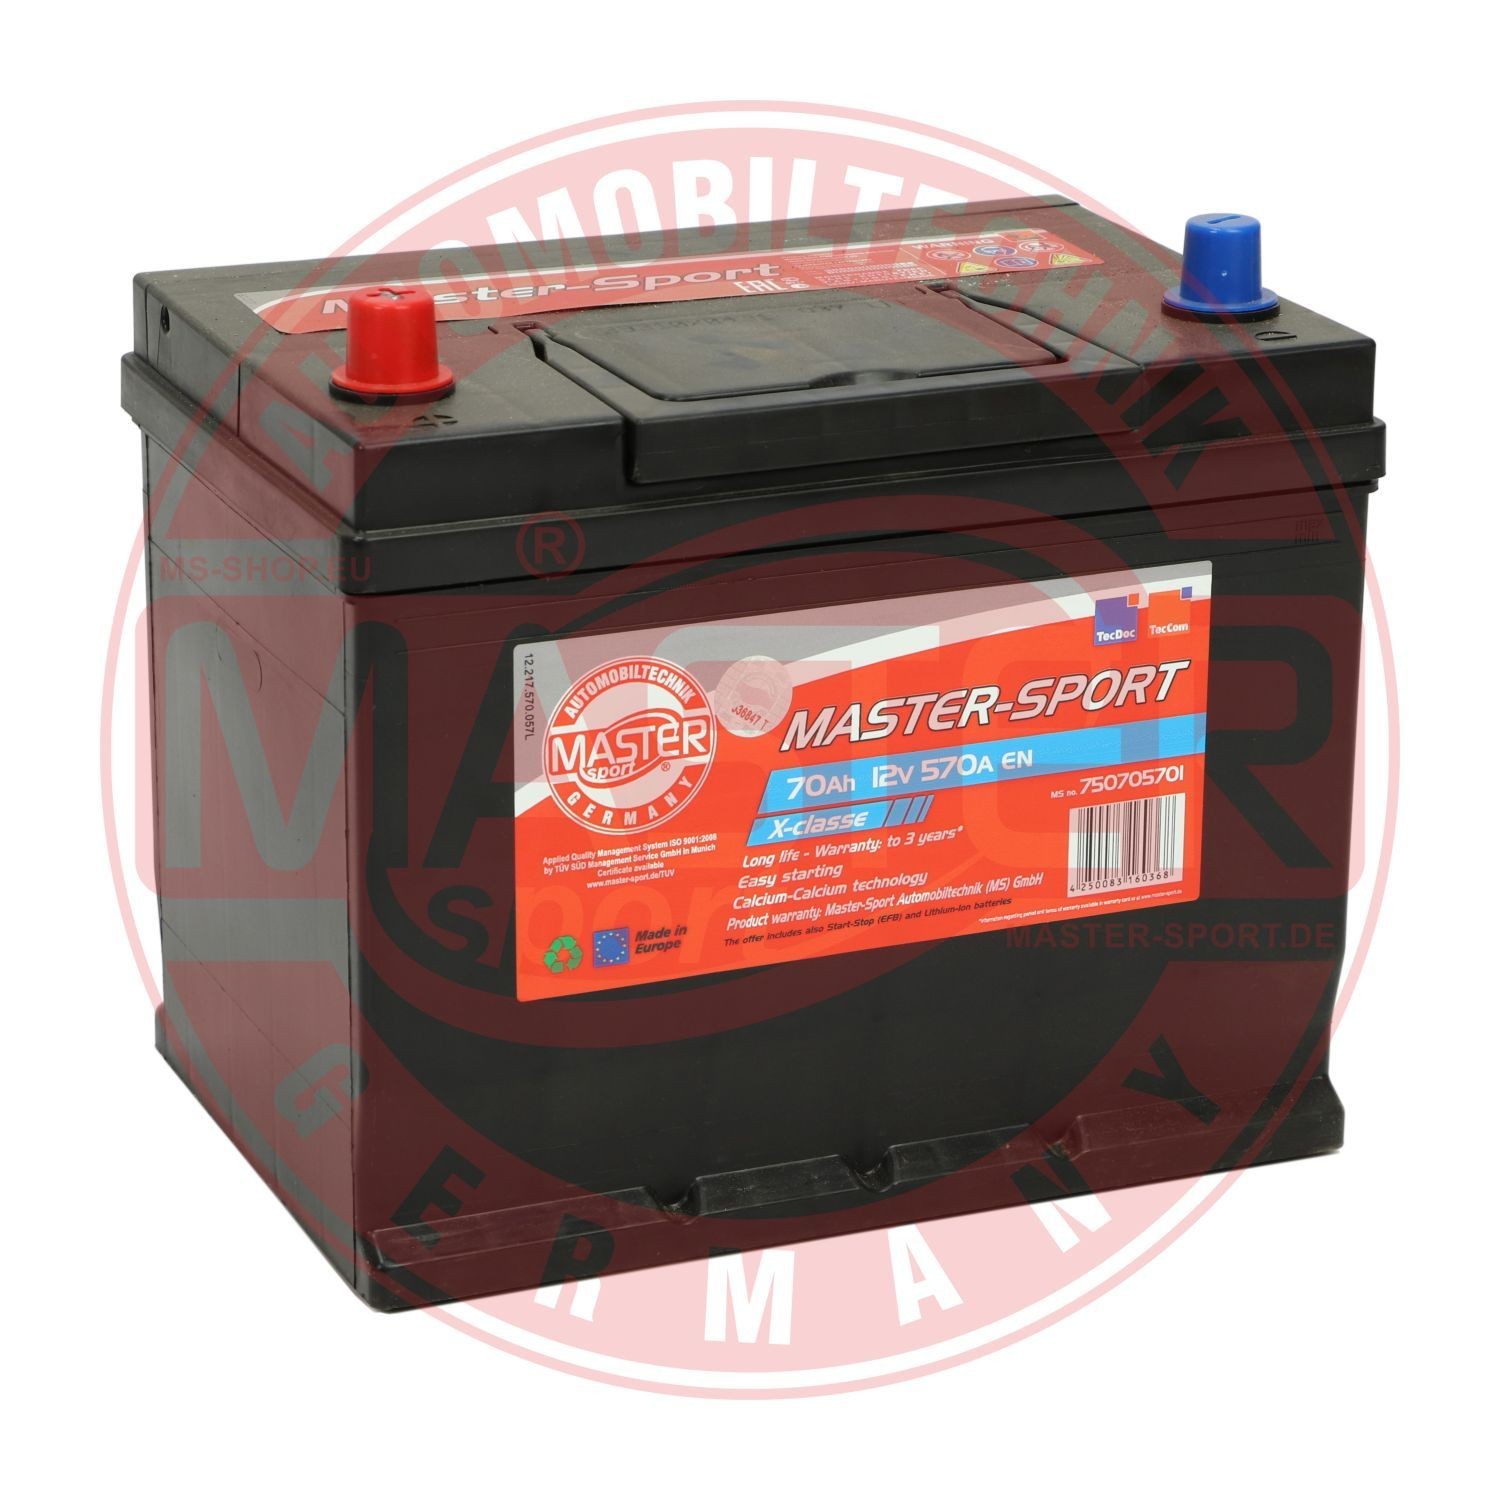 Original 750705701 MASTER-SPORT Auxiliary battery DODGE